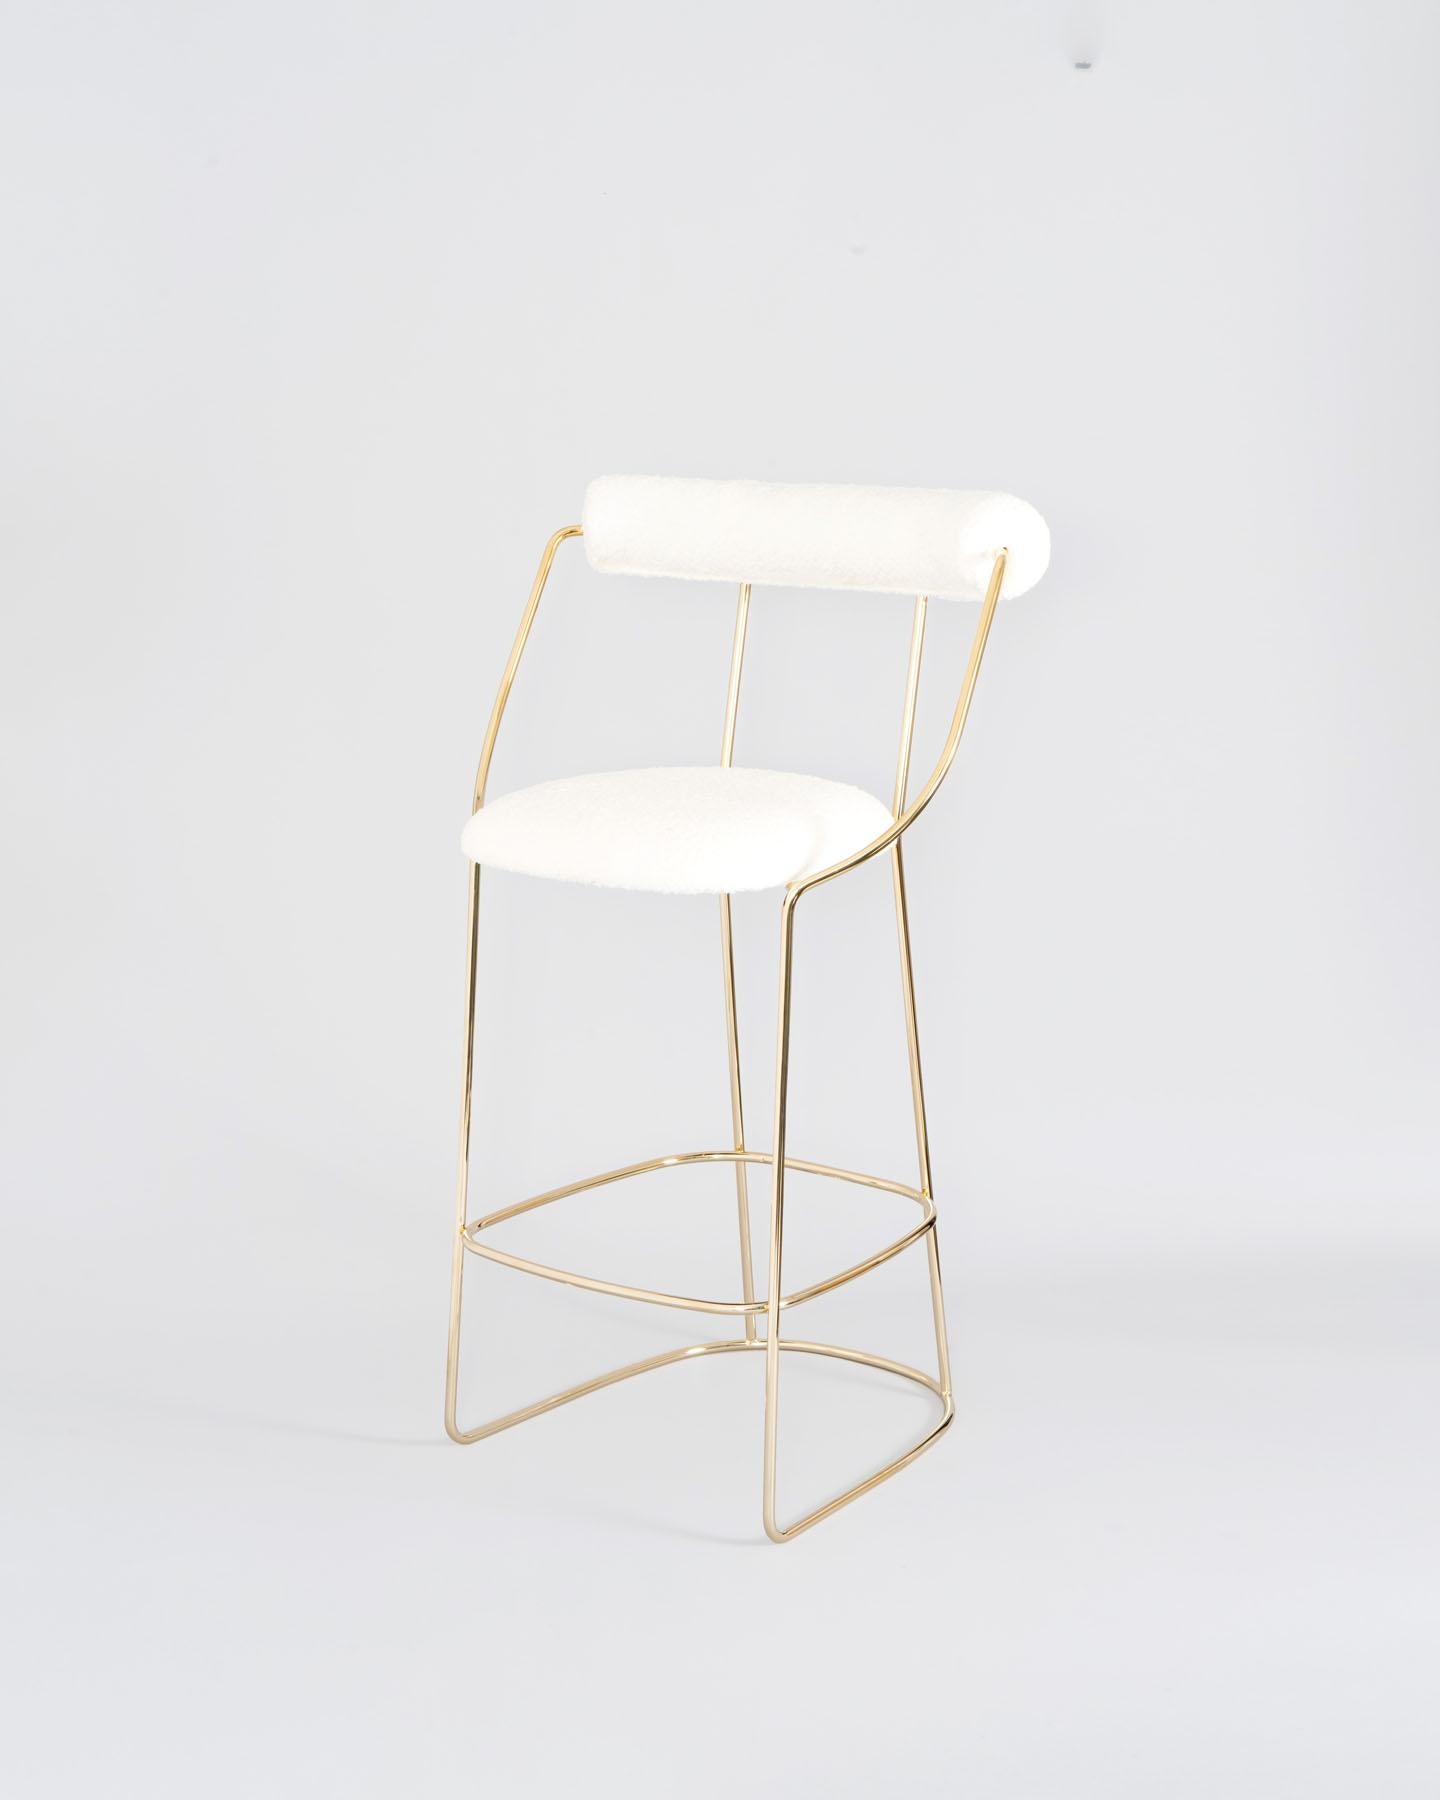  Fran, a continuous element extending from the base upwards, outlining a spacious, inviting, padded, and removable backrest that envelops the seat in its downward return. The result is a chair with an ancestral, elegant, lightweight, durable design,